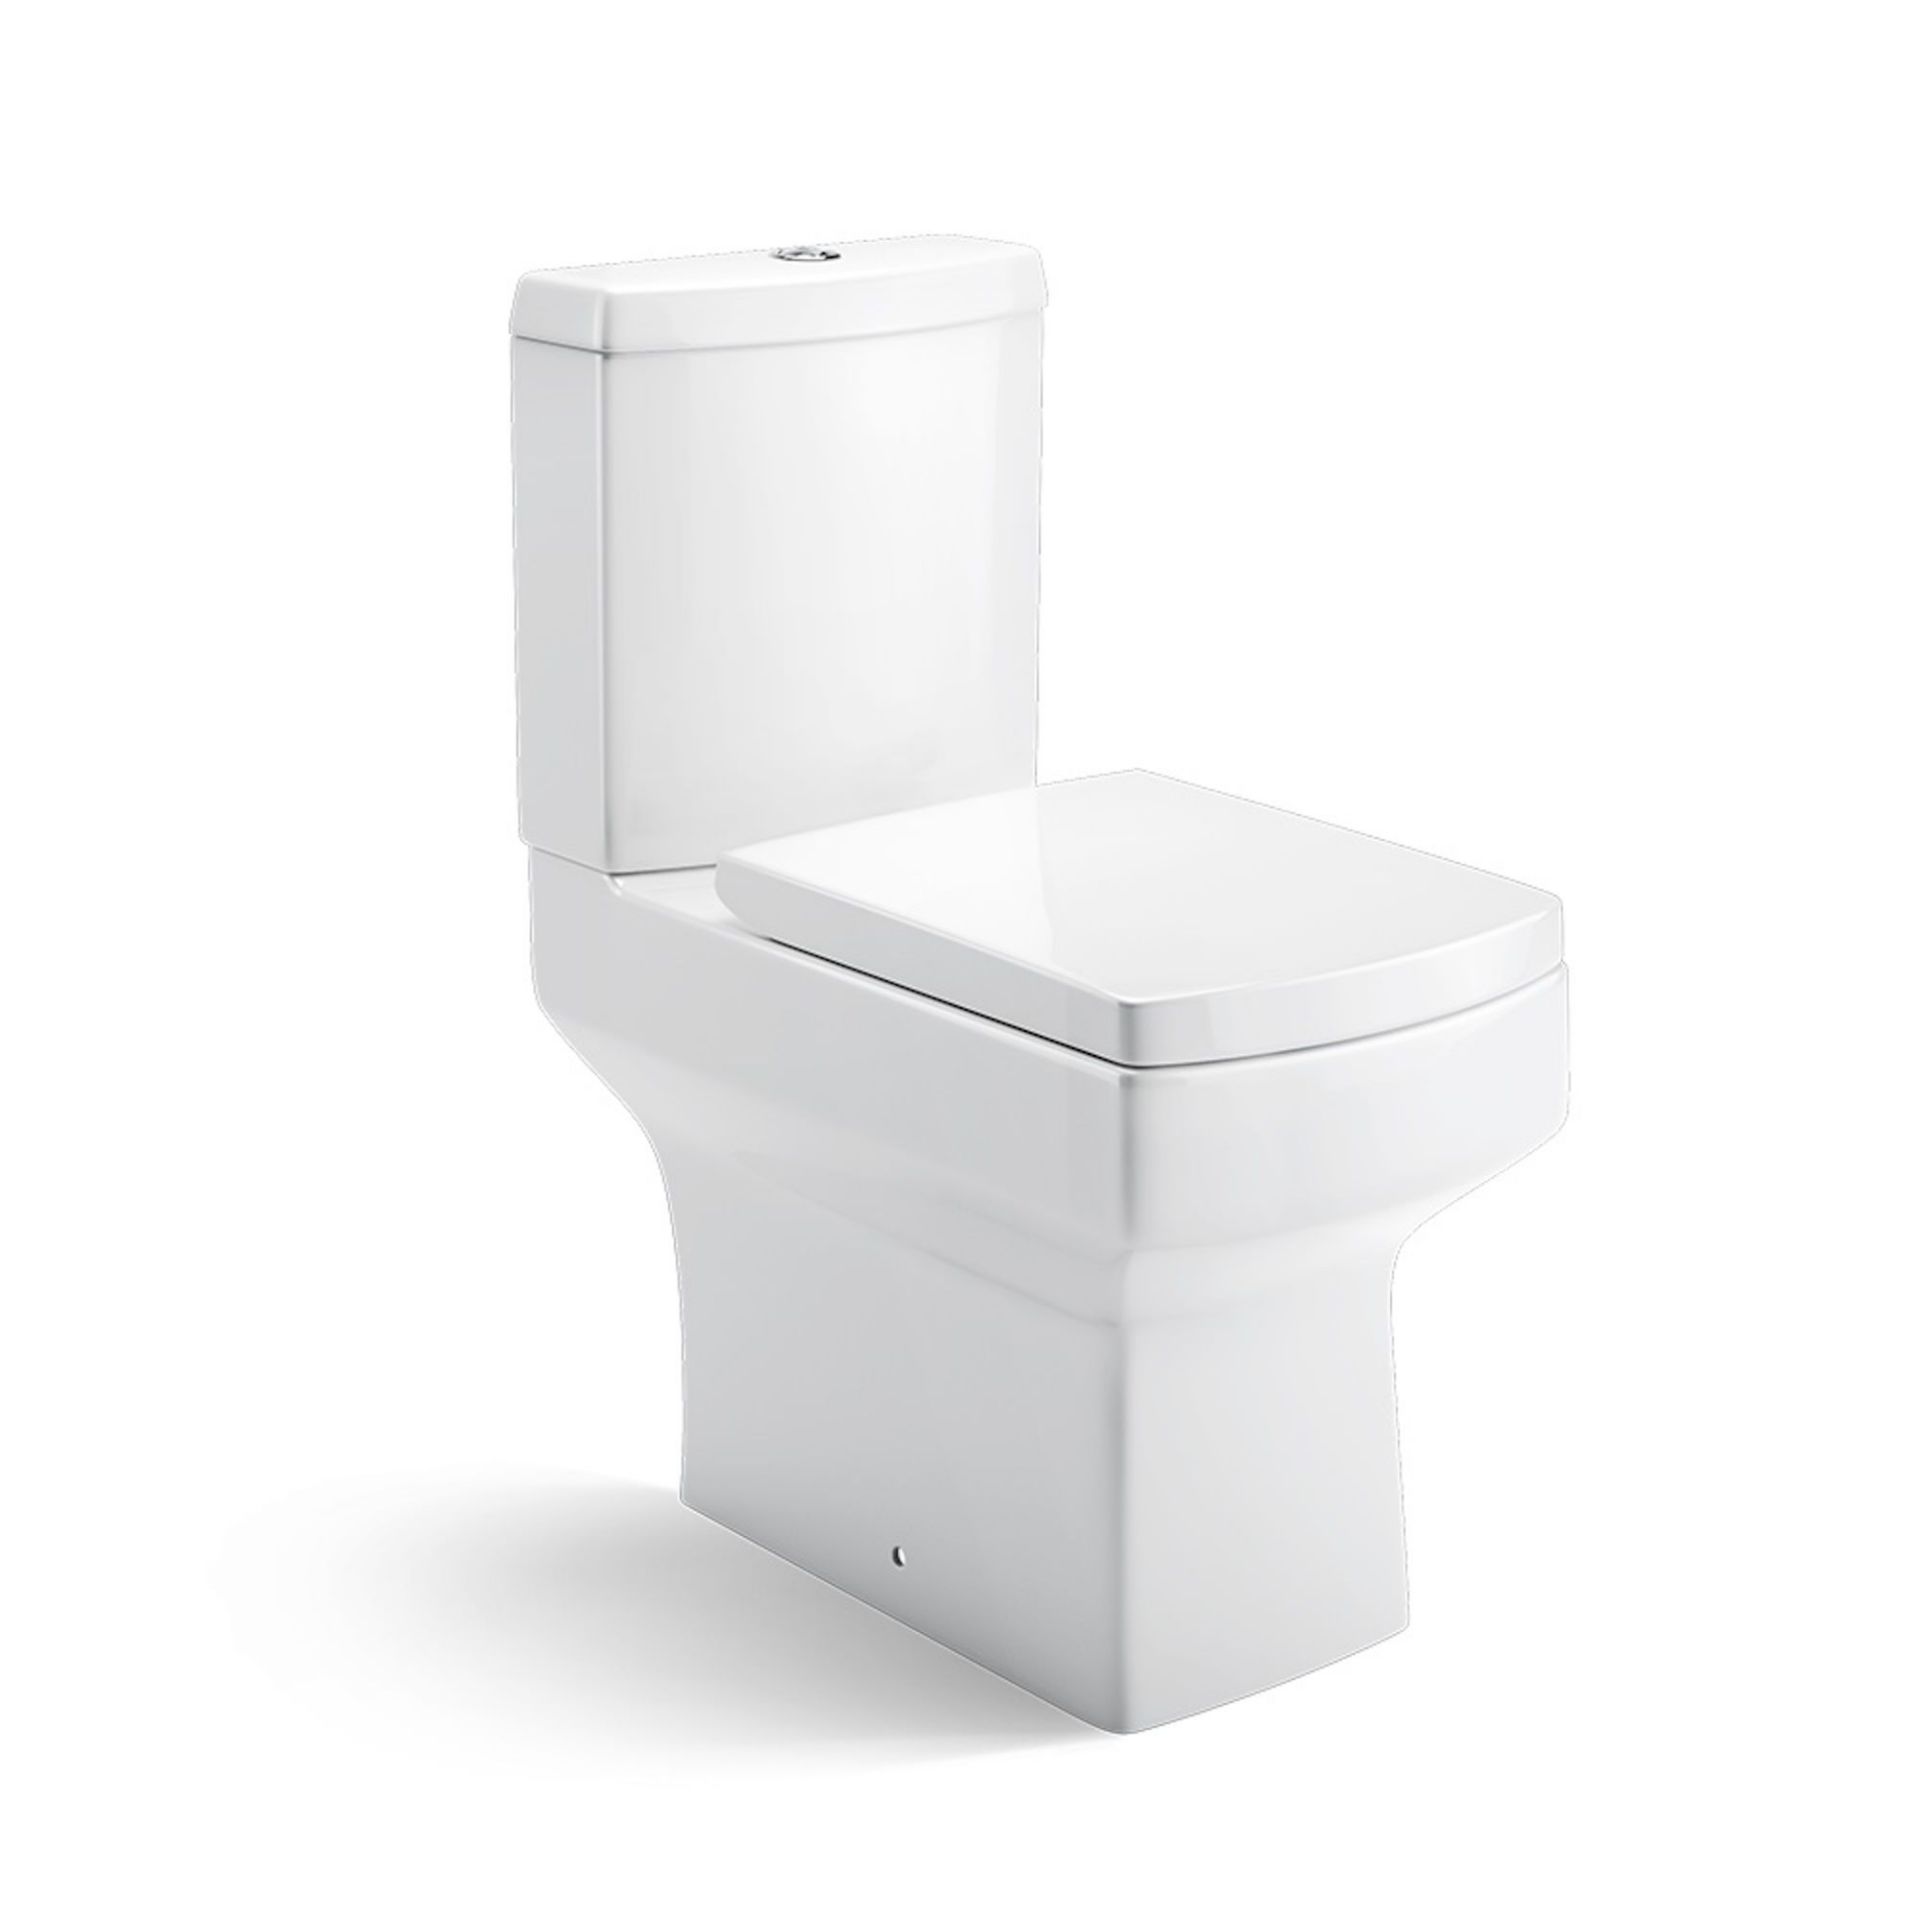 (OS101) Belfort Close Coupled Toilet & Cistern inc Soft Close Seat. Made from White Vitreous China - Image 2 of 3